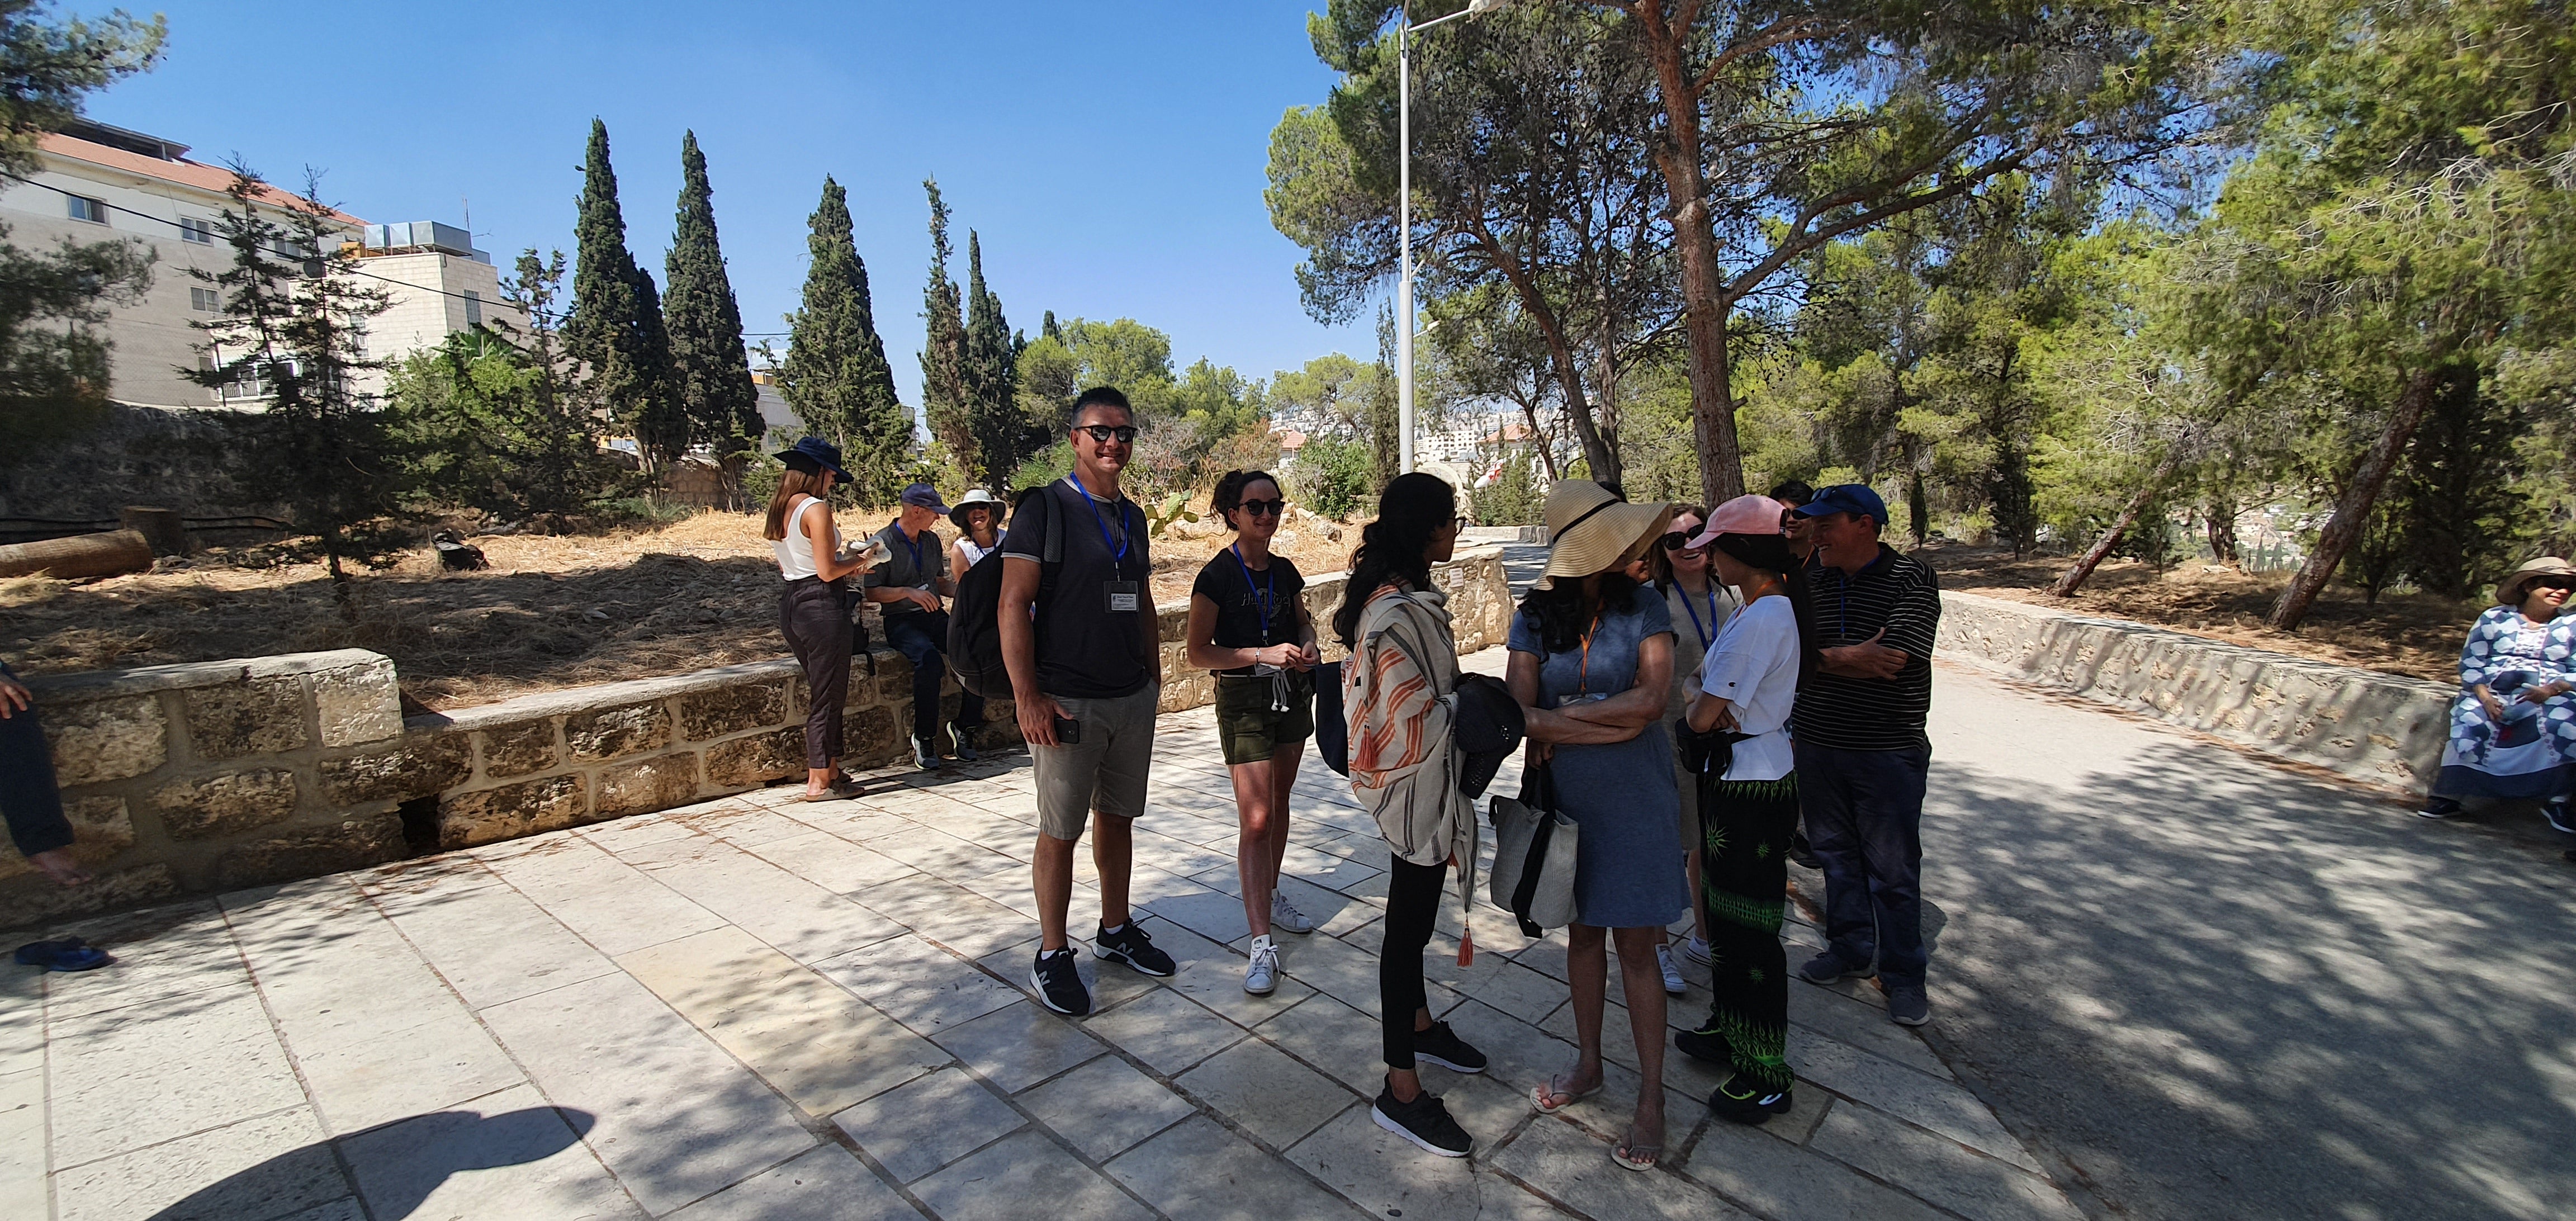 Half Day Tour to Bethlehem and Beit Sahour - Shepherd's field group Trip from Jerusalem and Tel Aviv